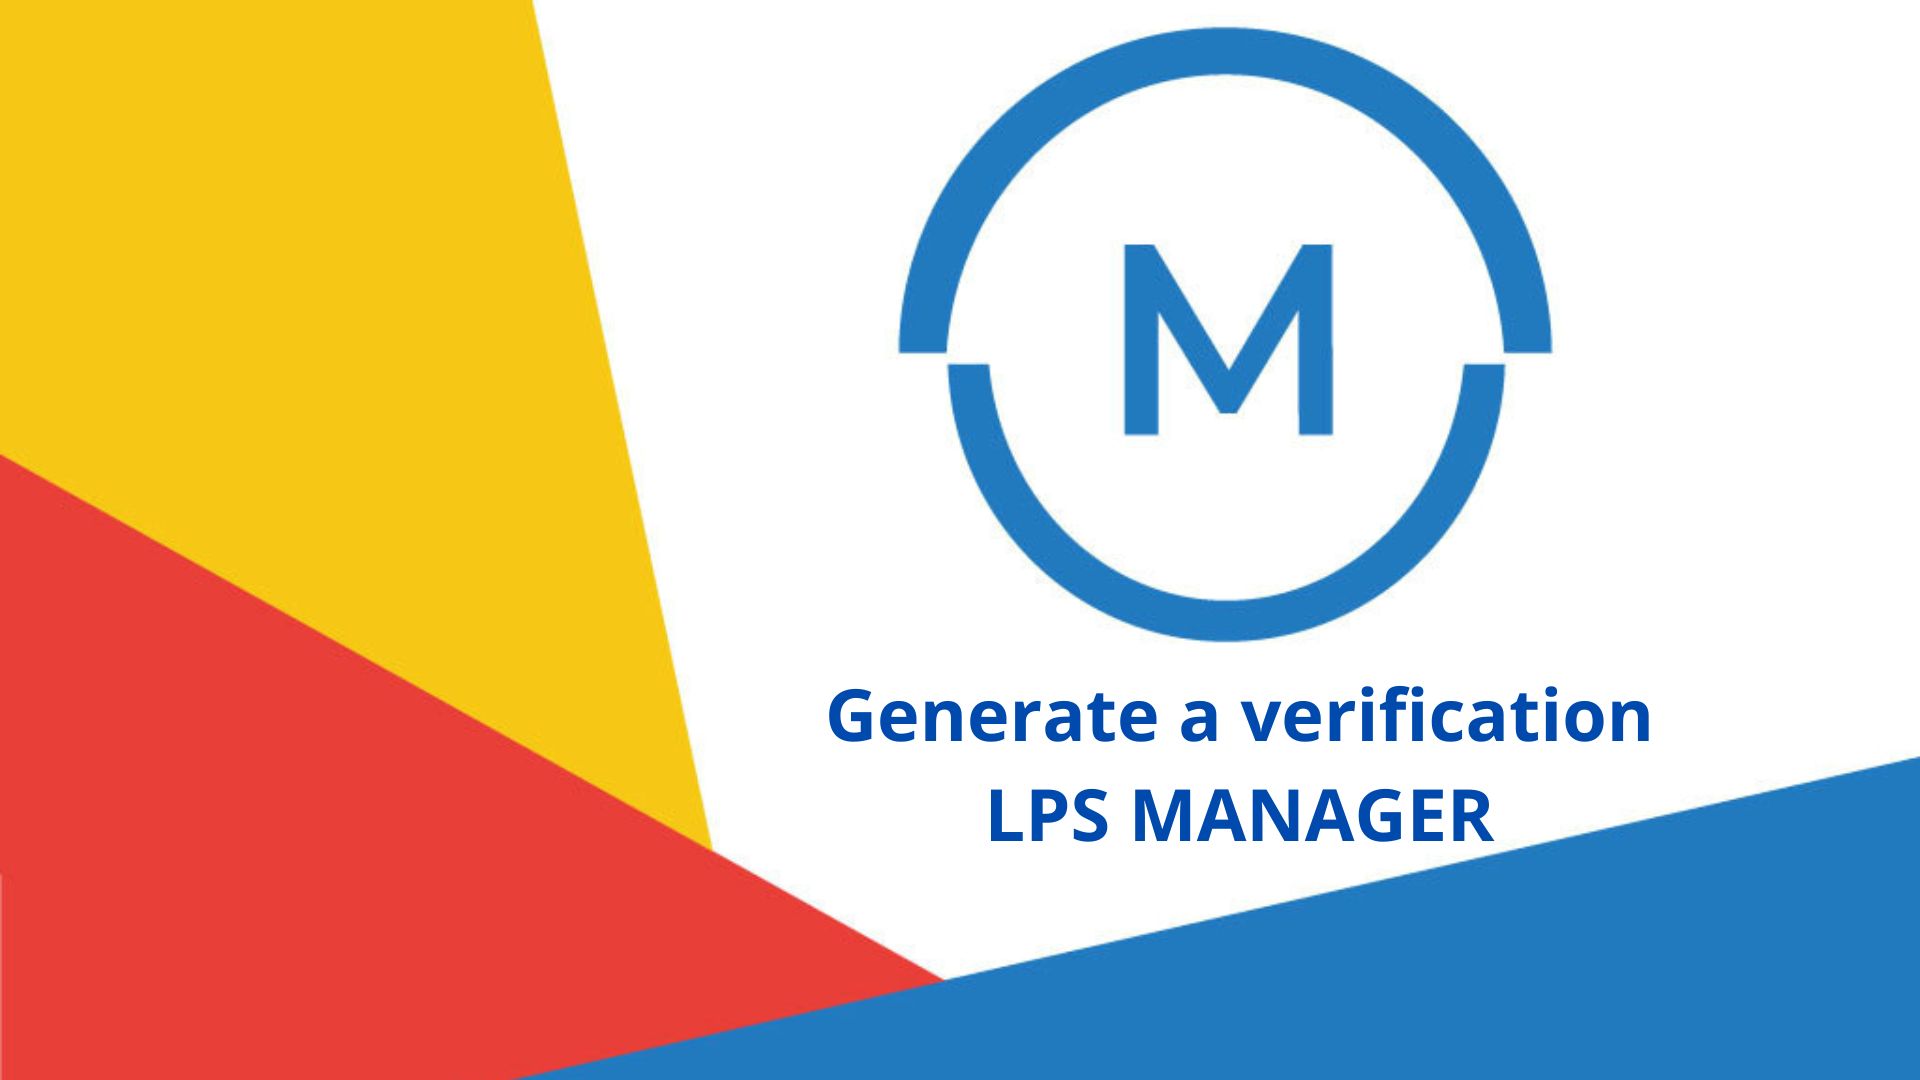 LPS Manager, generate the verification of a lightning protection system